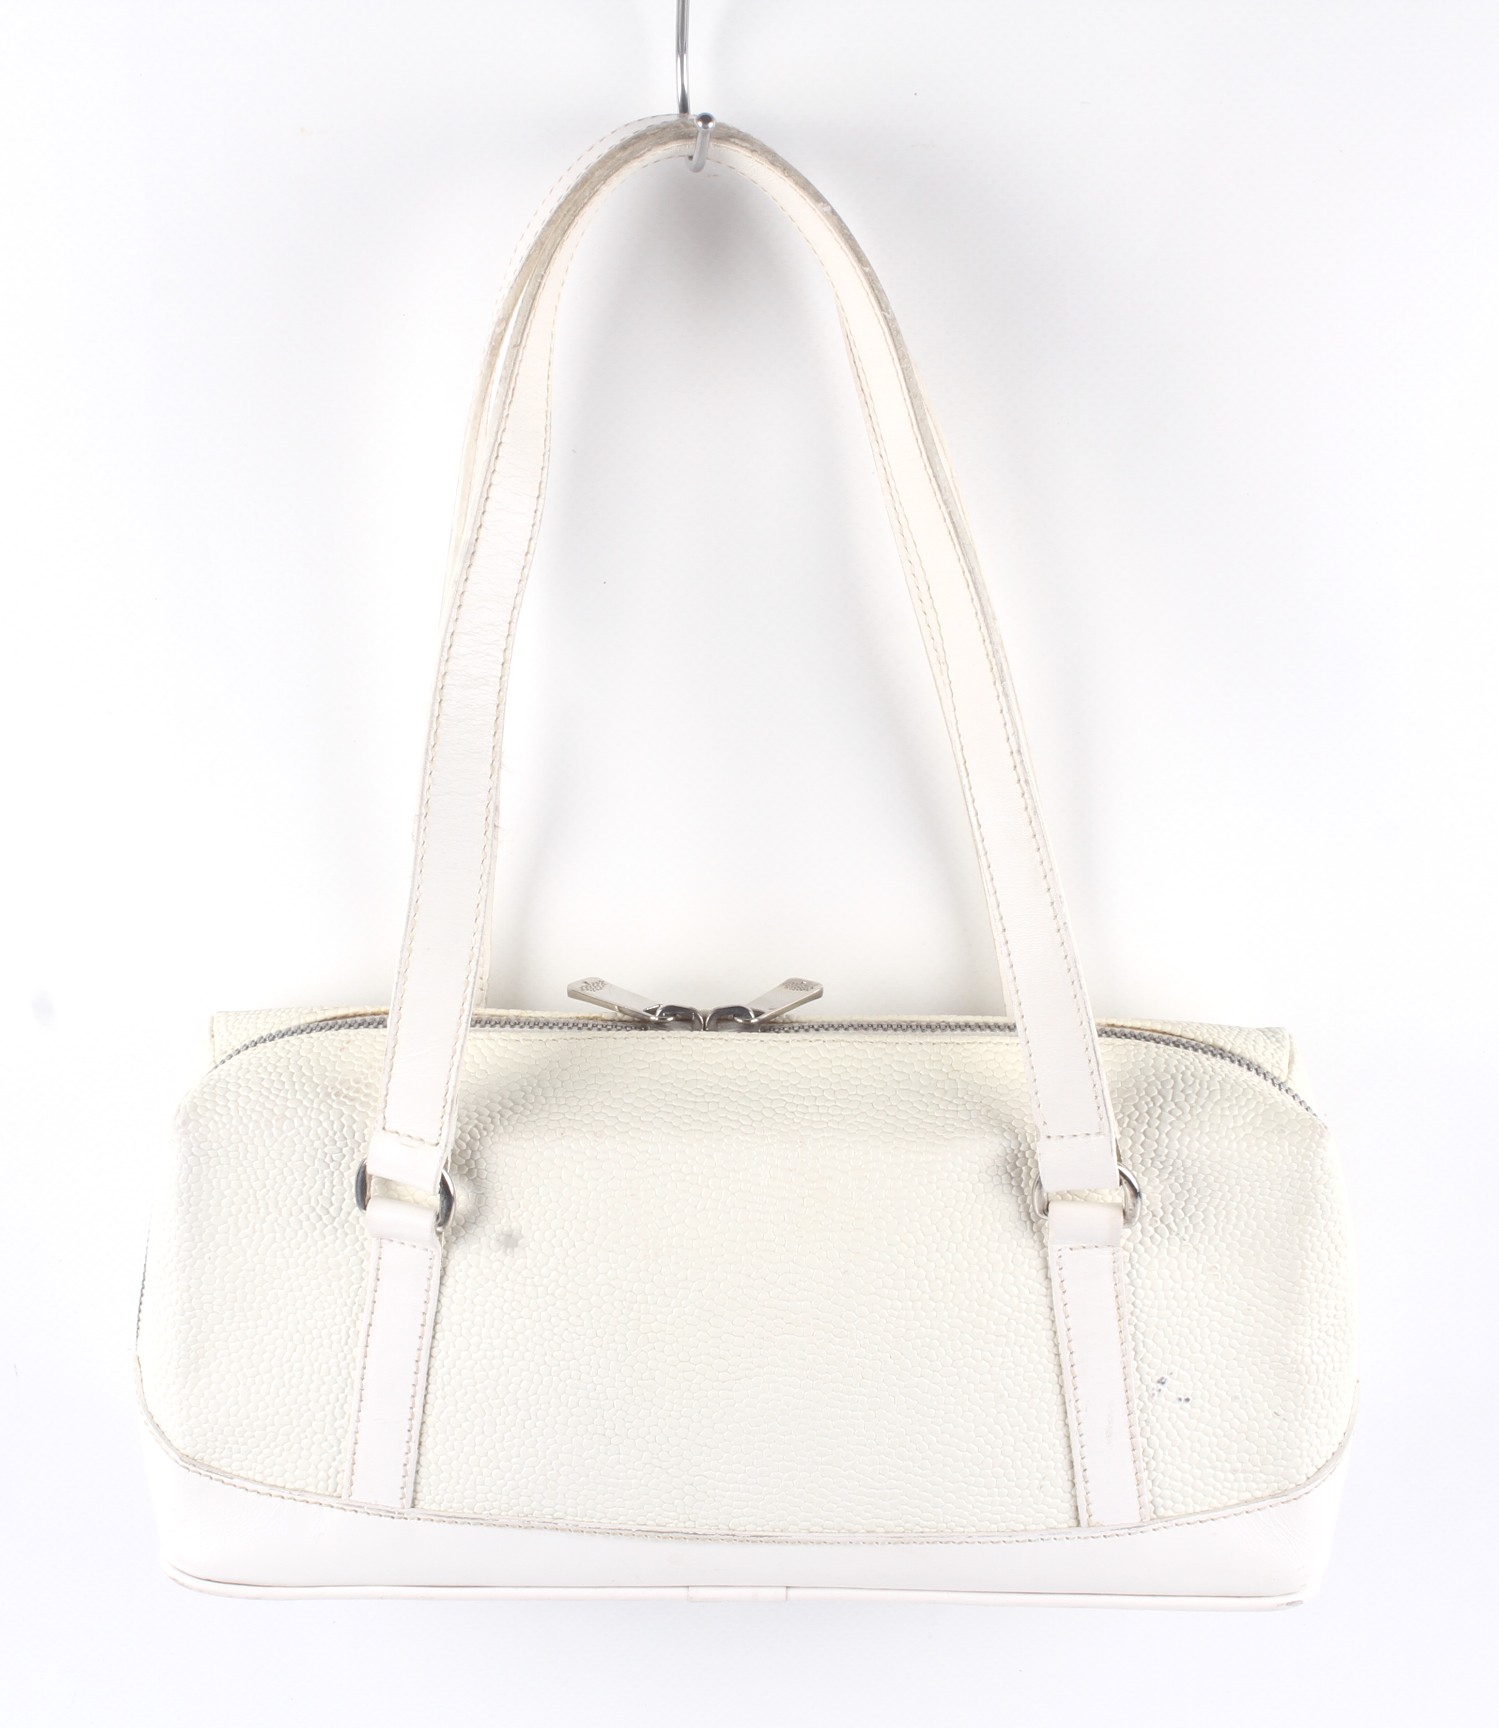 A Mulberry white leather handbag. - Image 2 of 3